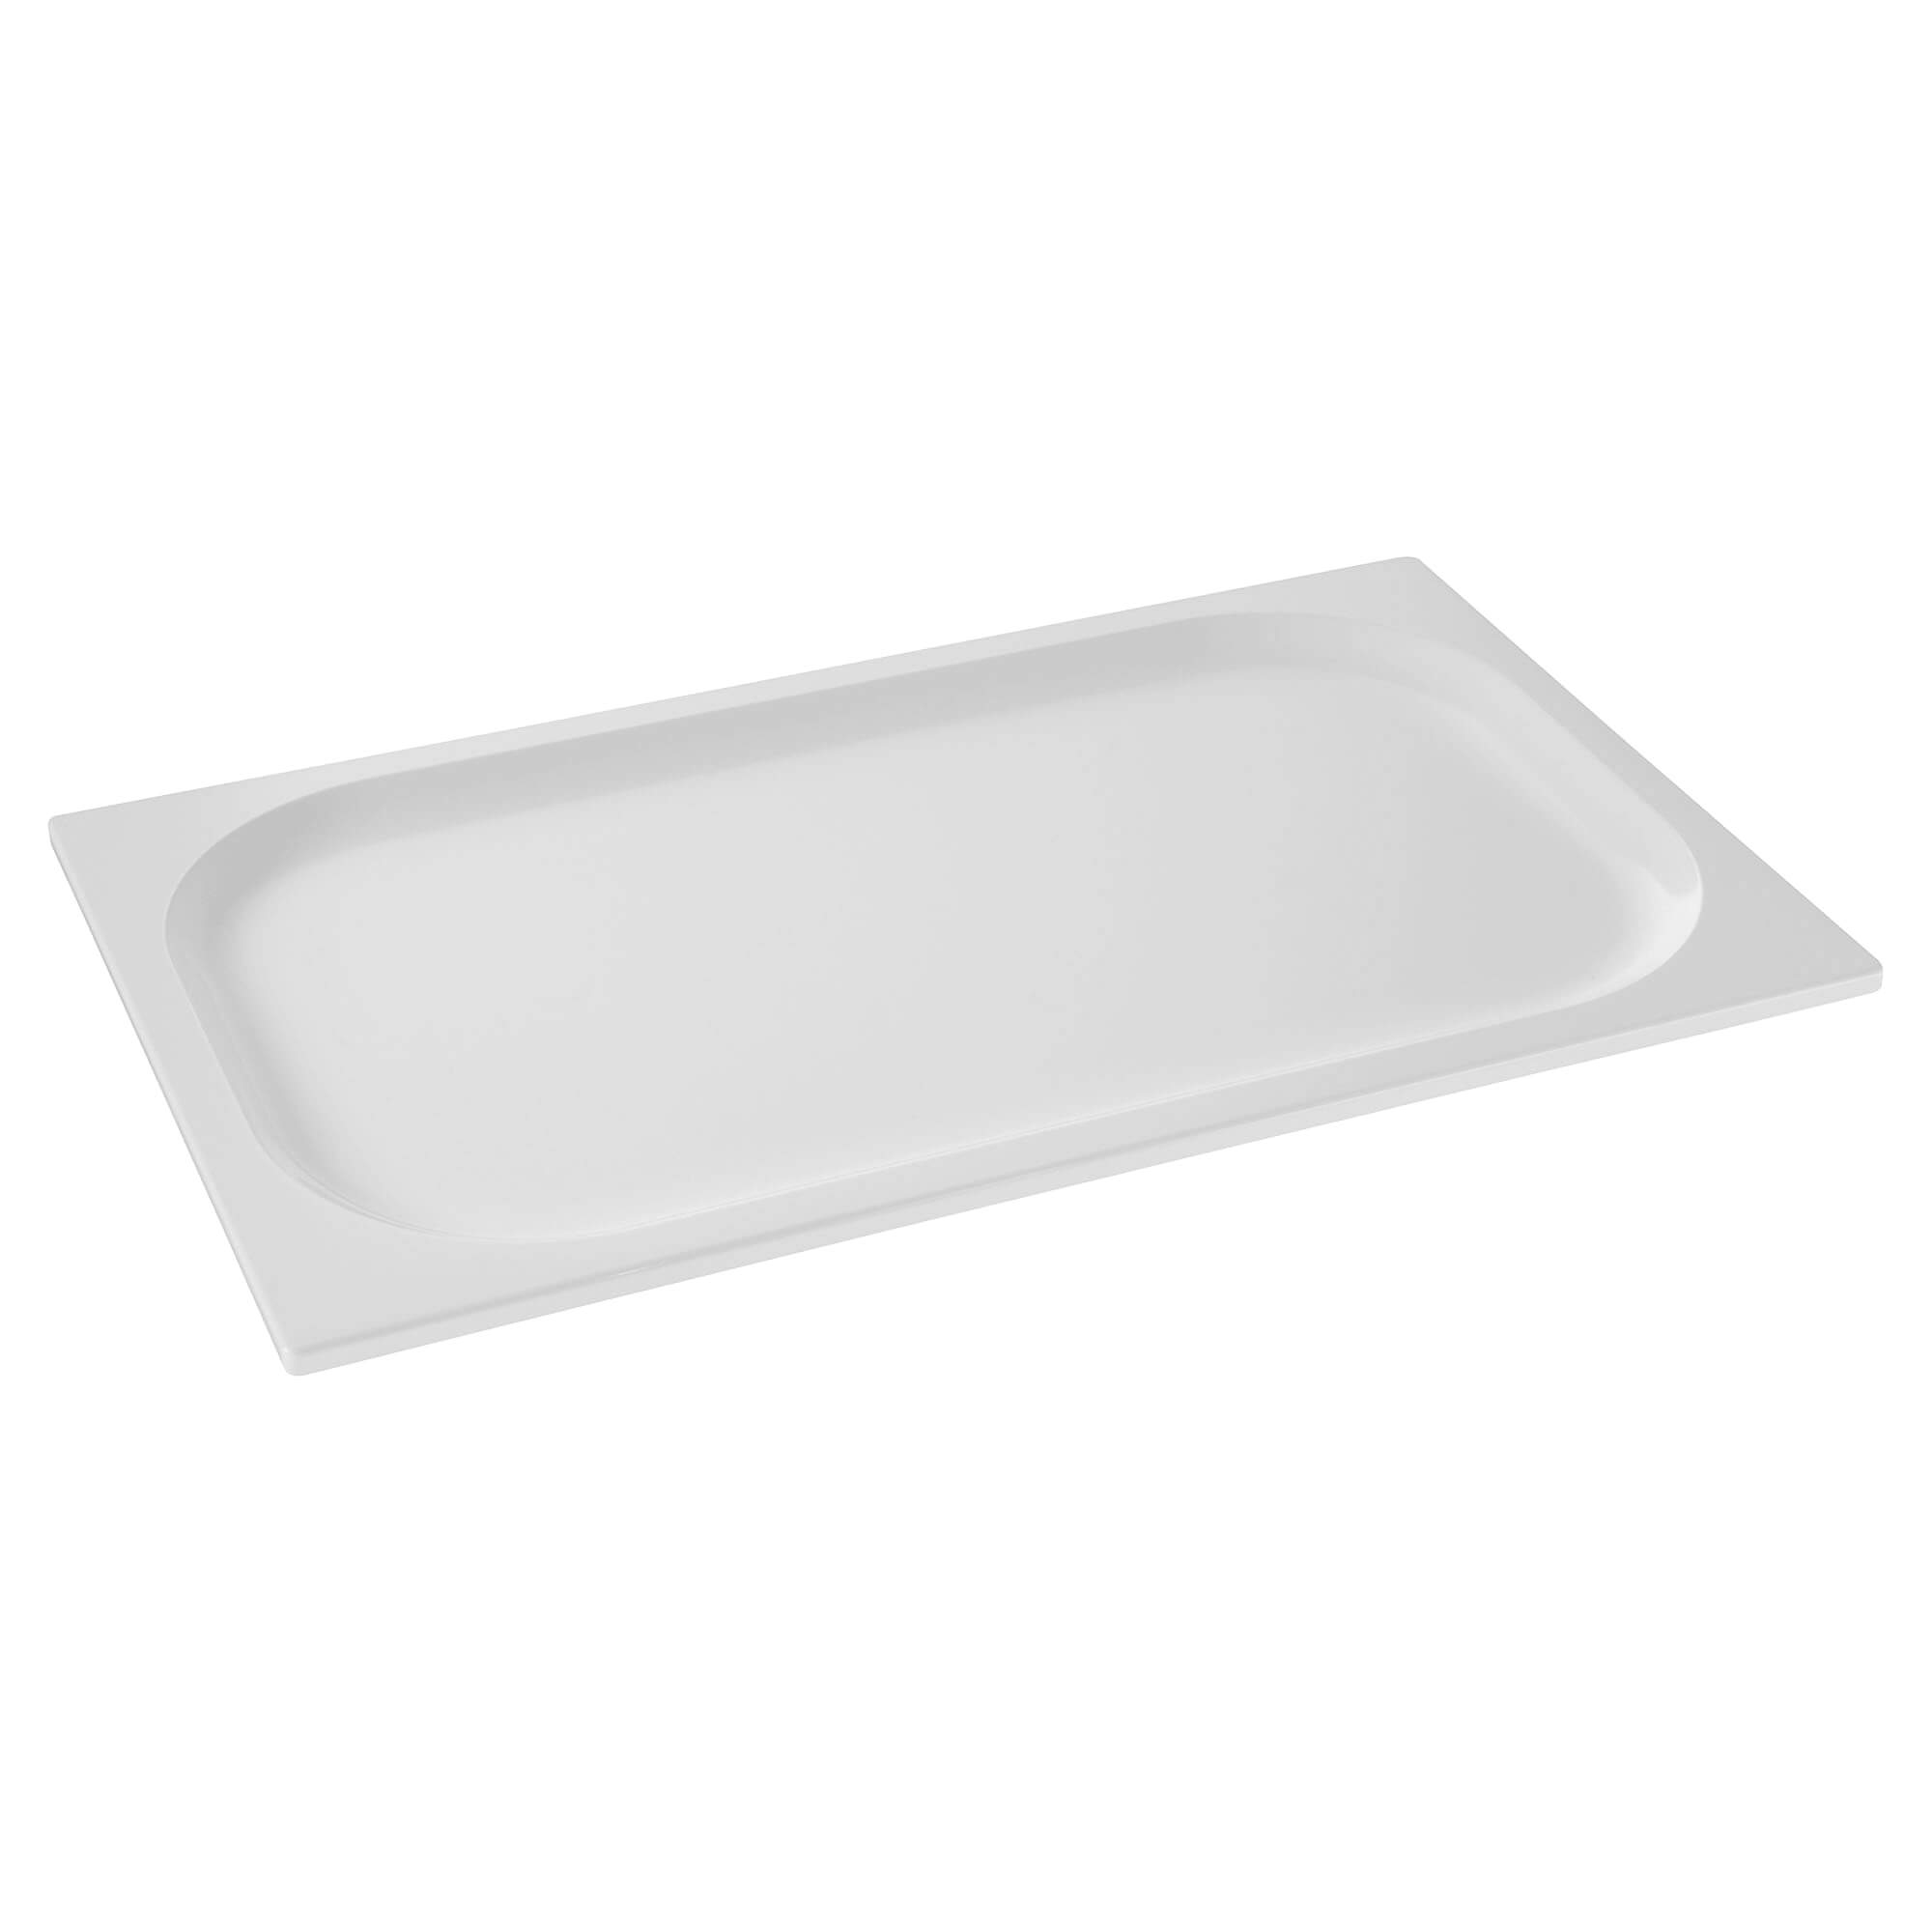 Modulus Vanity Tray in Canvas White